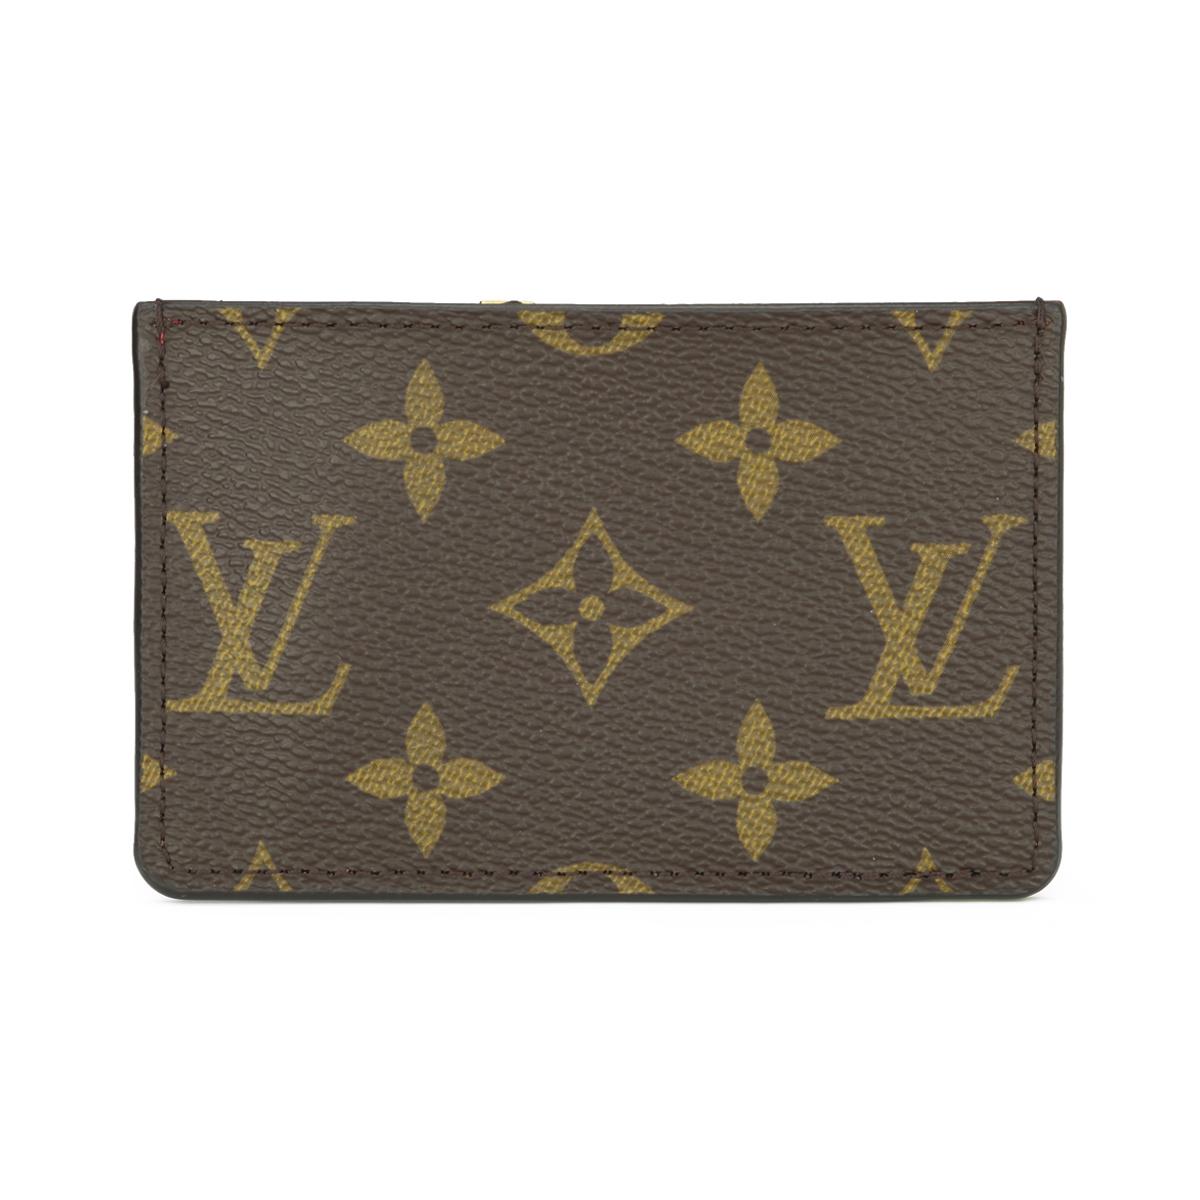  Louis Vuitton Kimono Card Holder Monogram Canvas Cerise Calf Leather with Gold Hardware 2016.

This cardholder is in excellent condition.

- Exterior Condition: Excellent condition. Shows very minor signs of handling wear.

- Interior Condition: